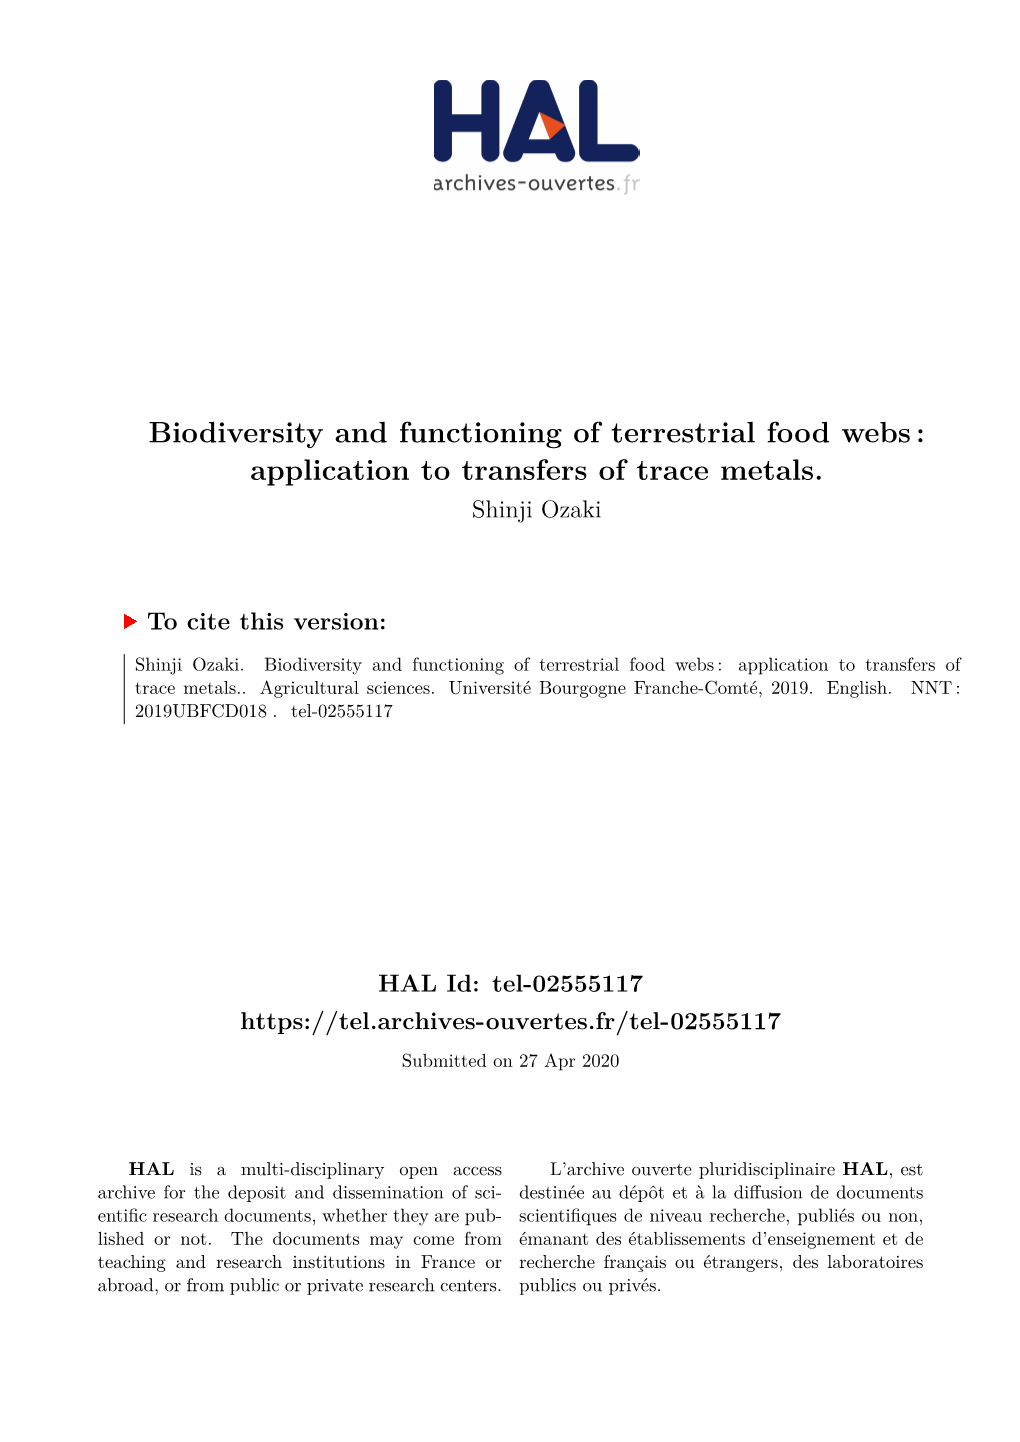 Biodiversity and Functioning of Terrestrial Food Webs : Application to Transfers of Trace Metals